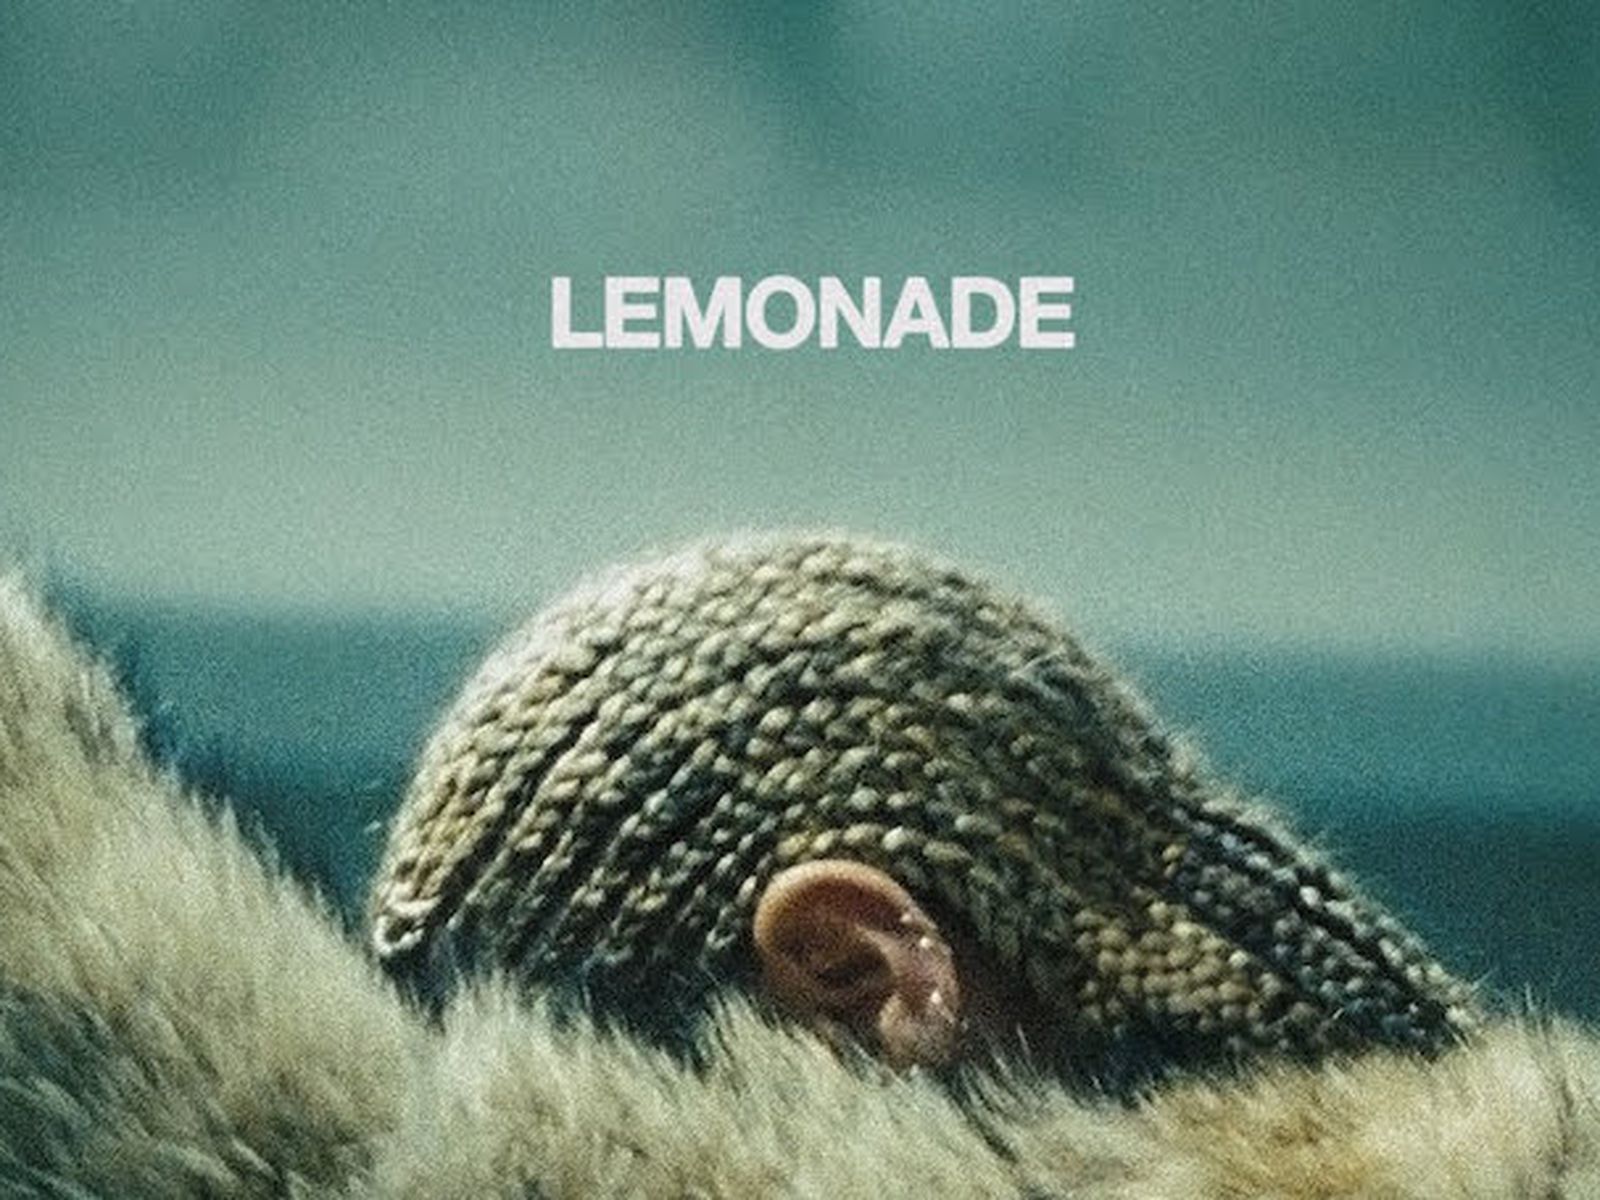 Beyoncé's New Album 'Lemonade' Rumored to Launch on iTunes Tonight [Update: Available Now]